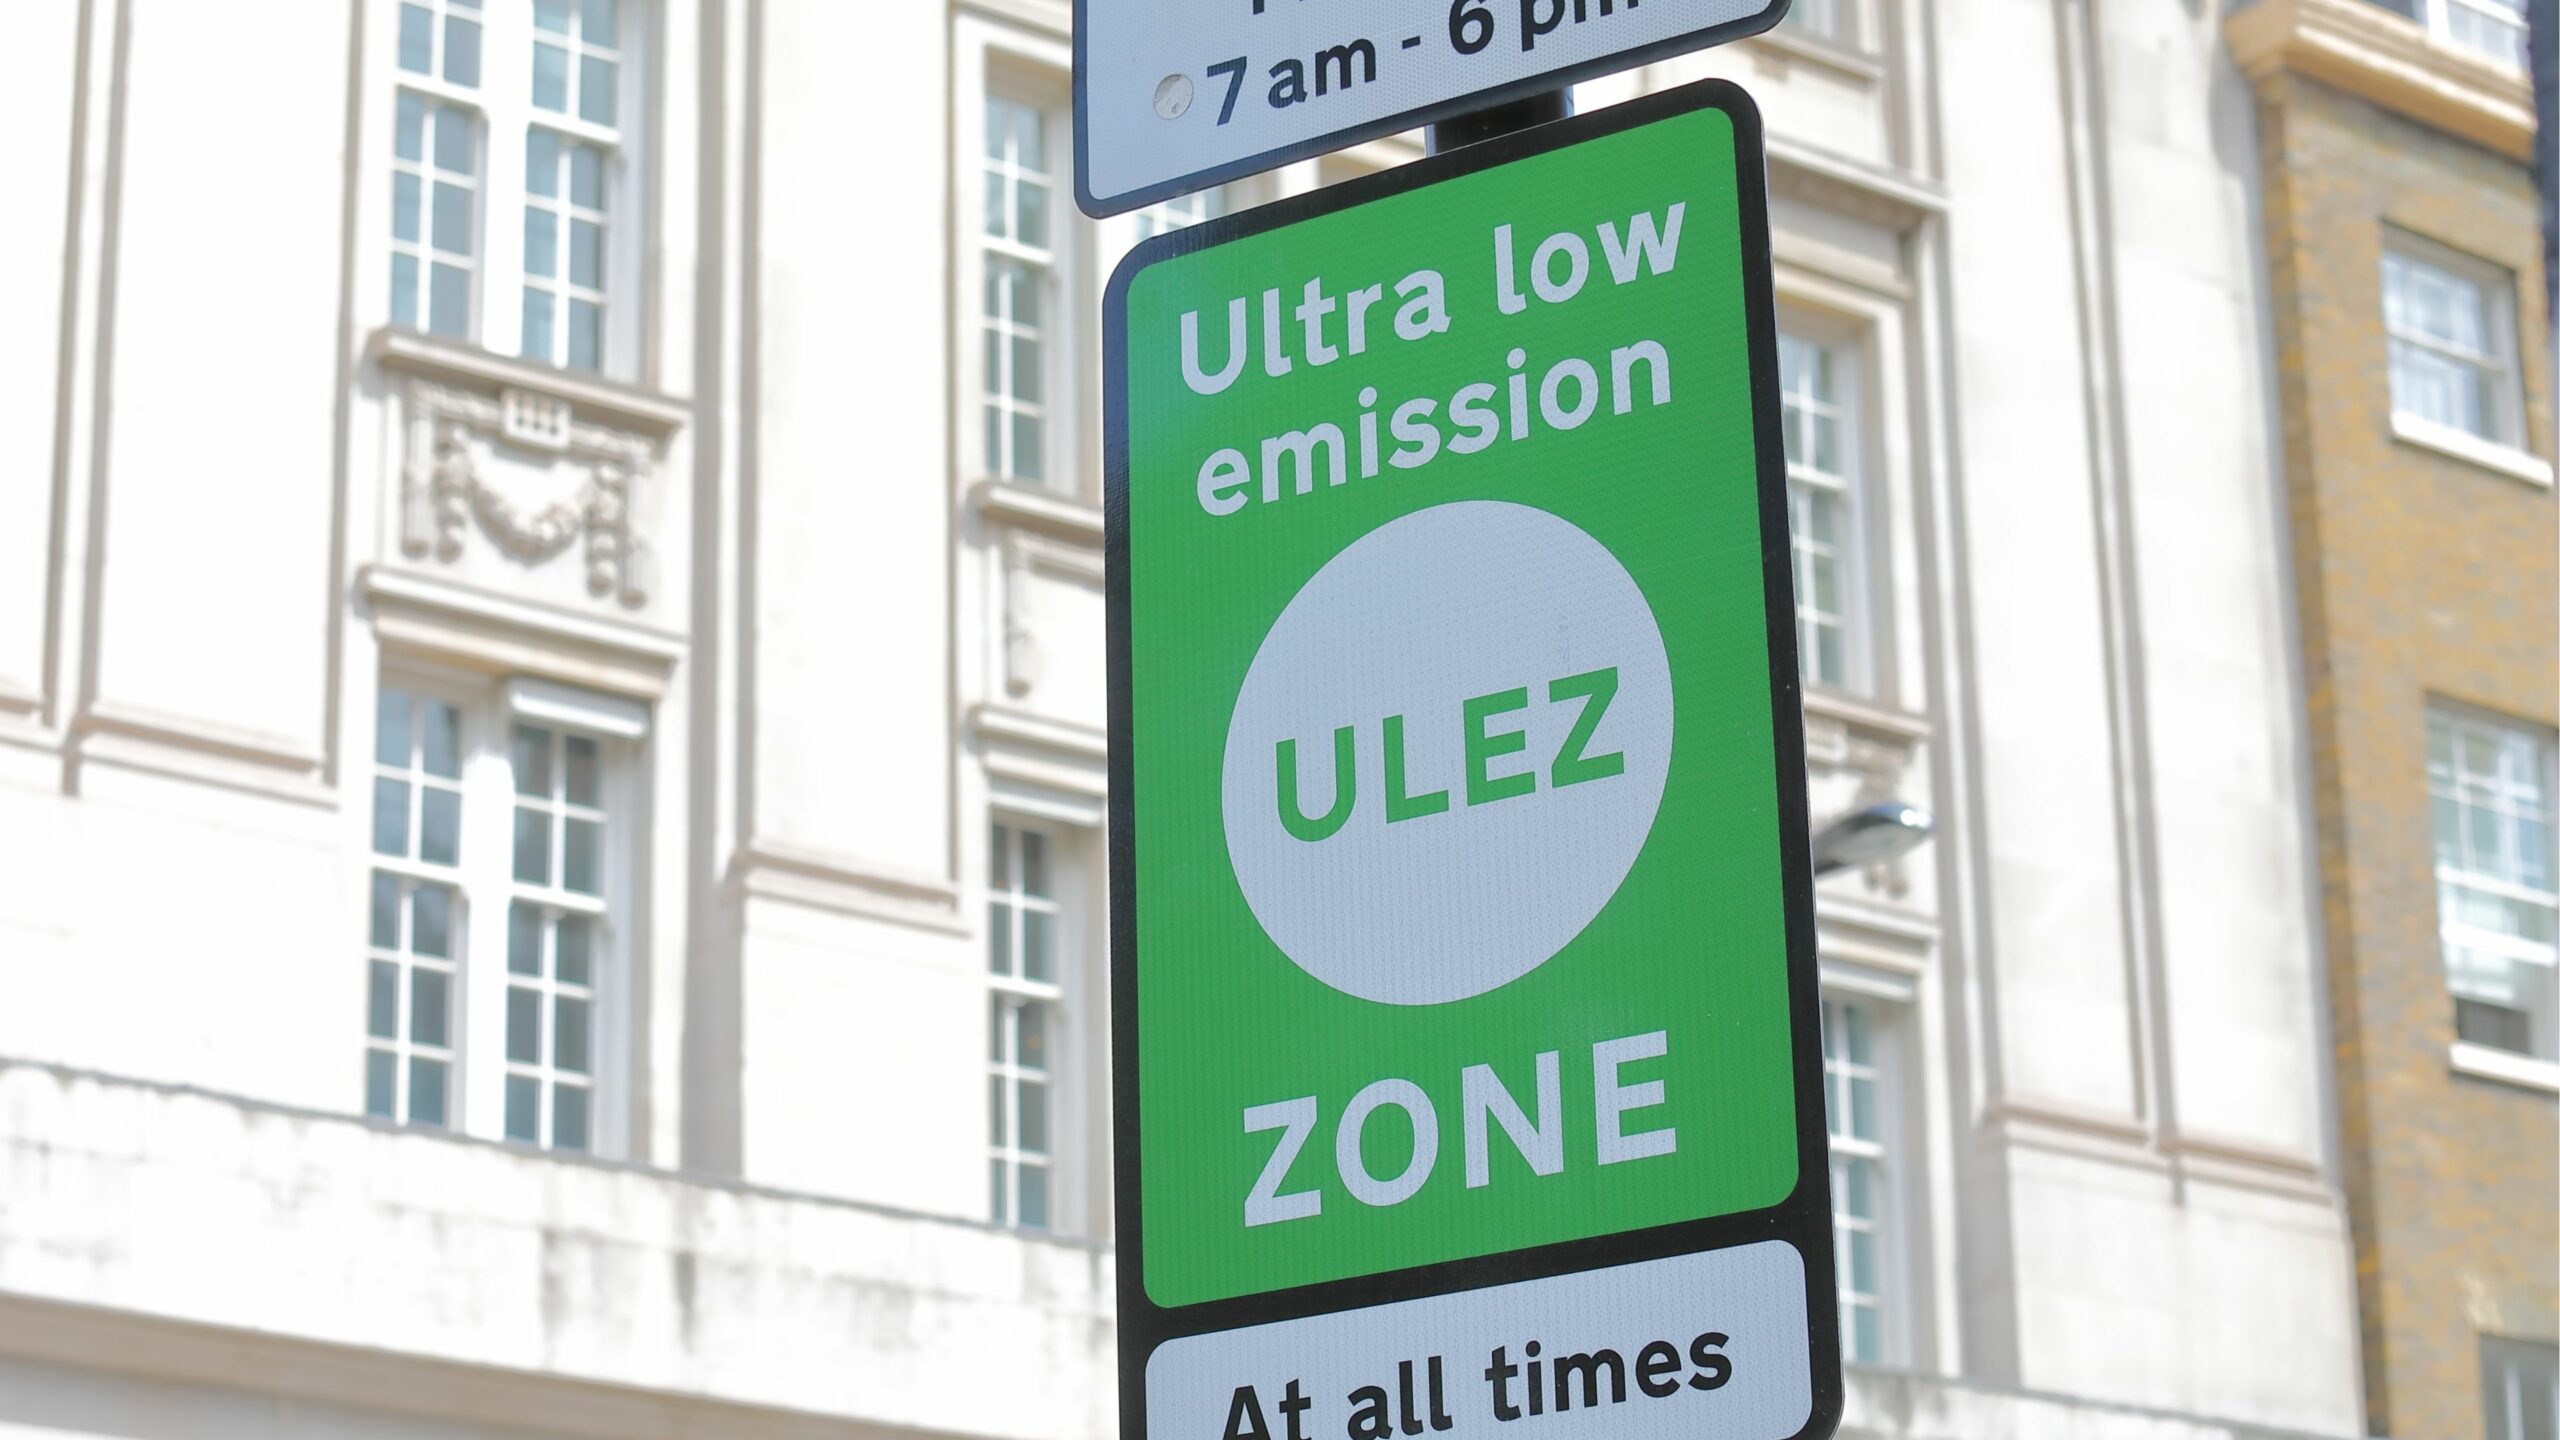 Initially, the ULEZ covered the same central area as the Congestion Zone before widening to the North and South Circular roads in 2021. In November 2022, a further expansion to cover all London boroughs was confirmed, and this is due to start on 29th August 2023.